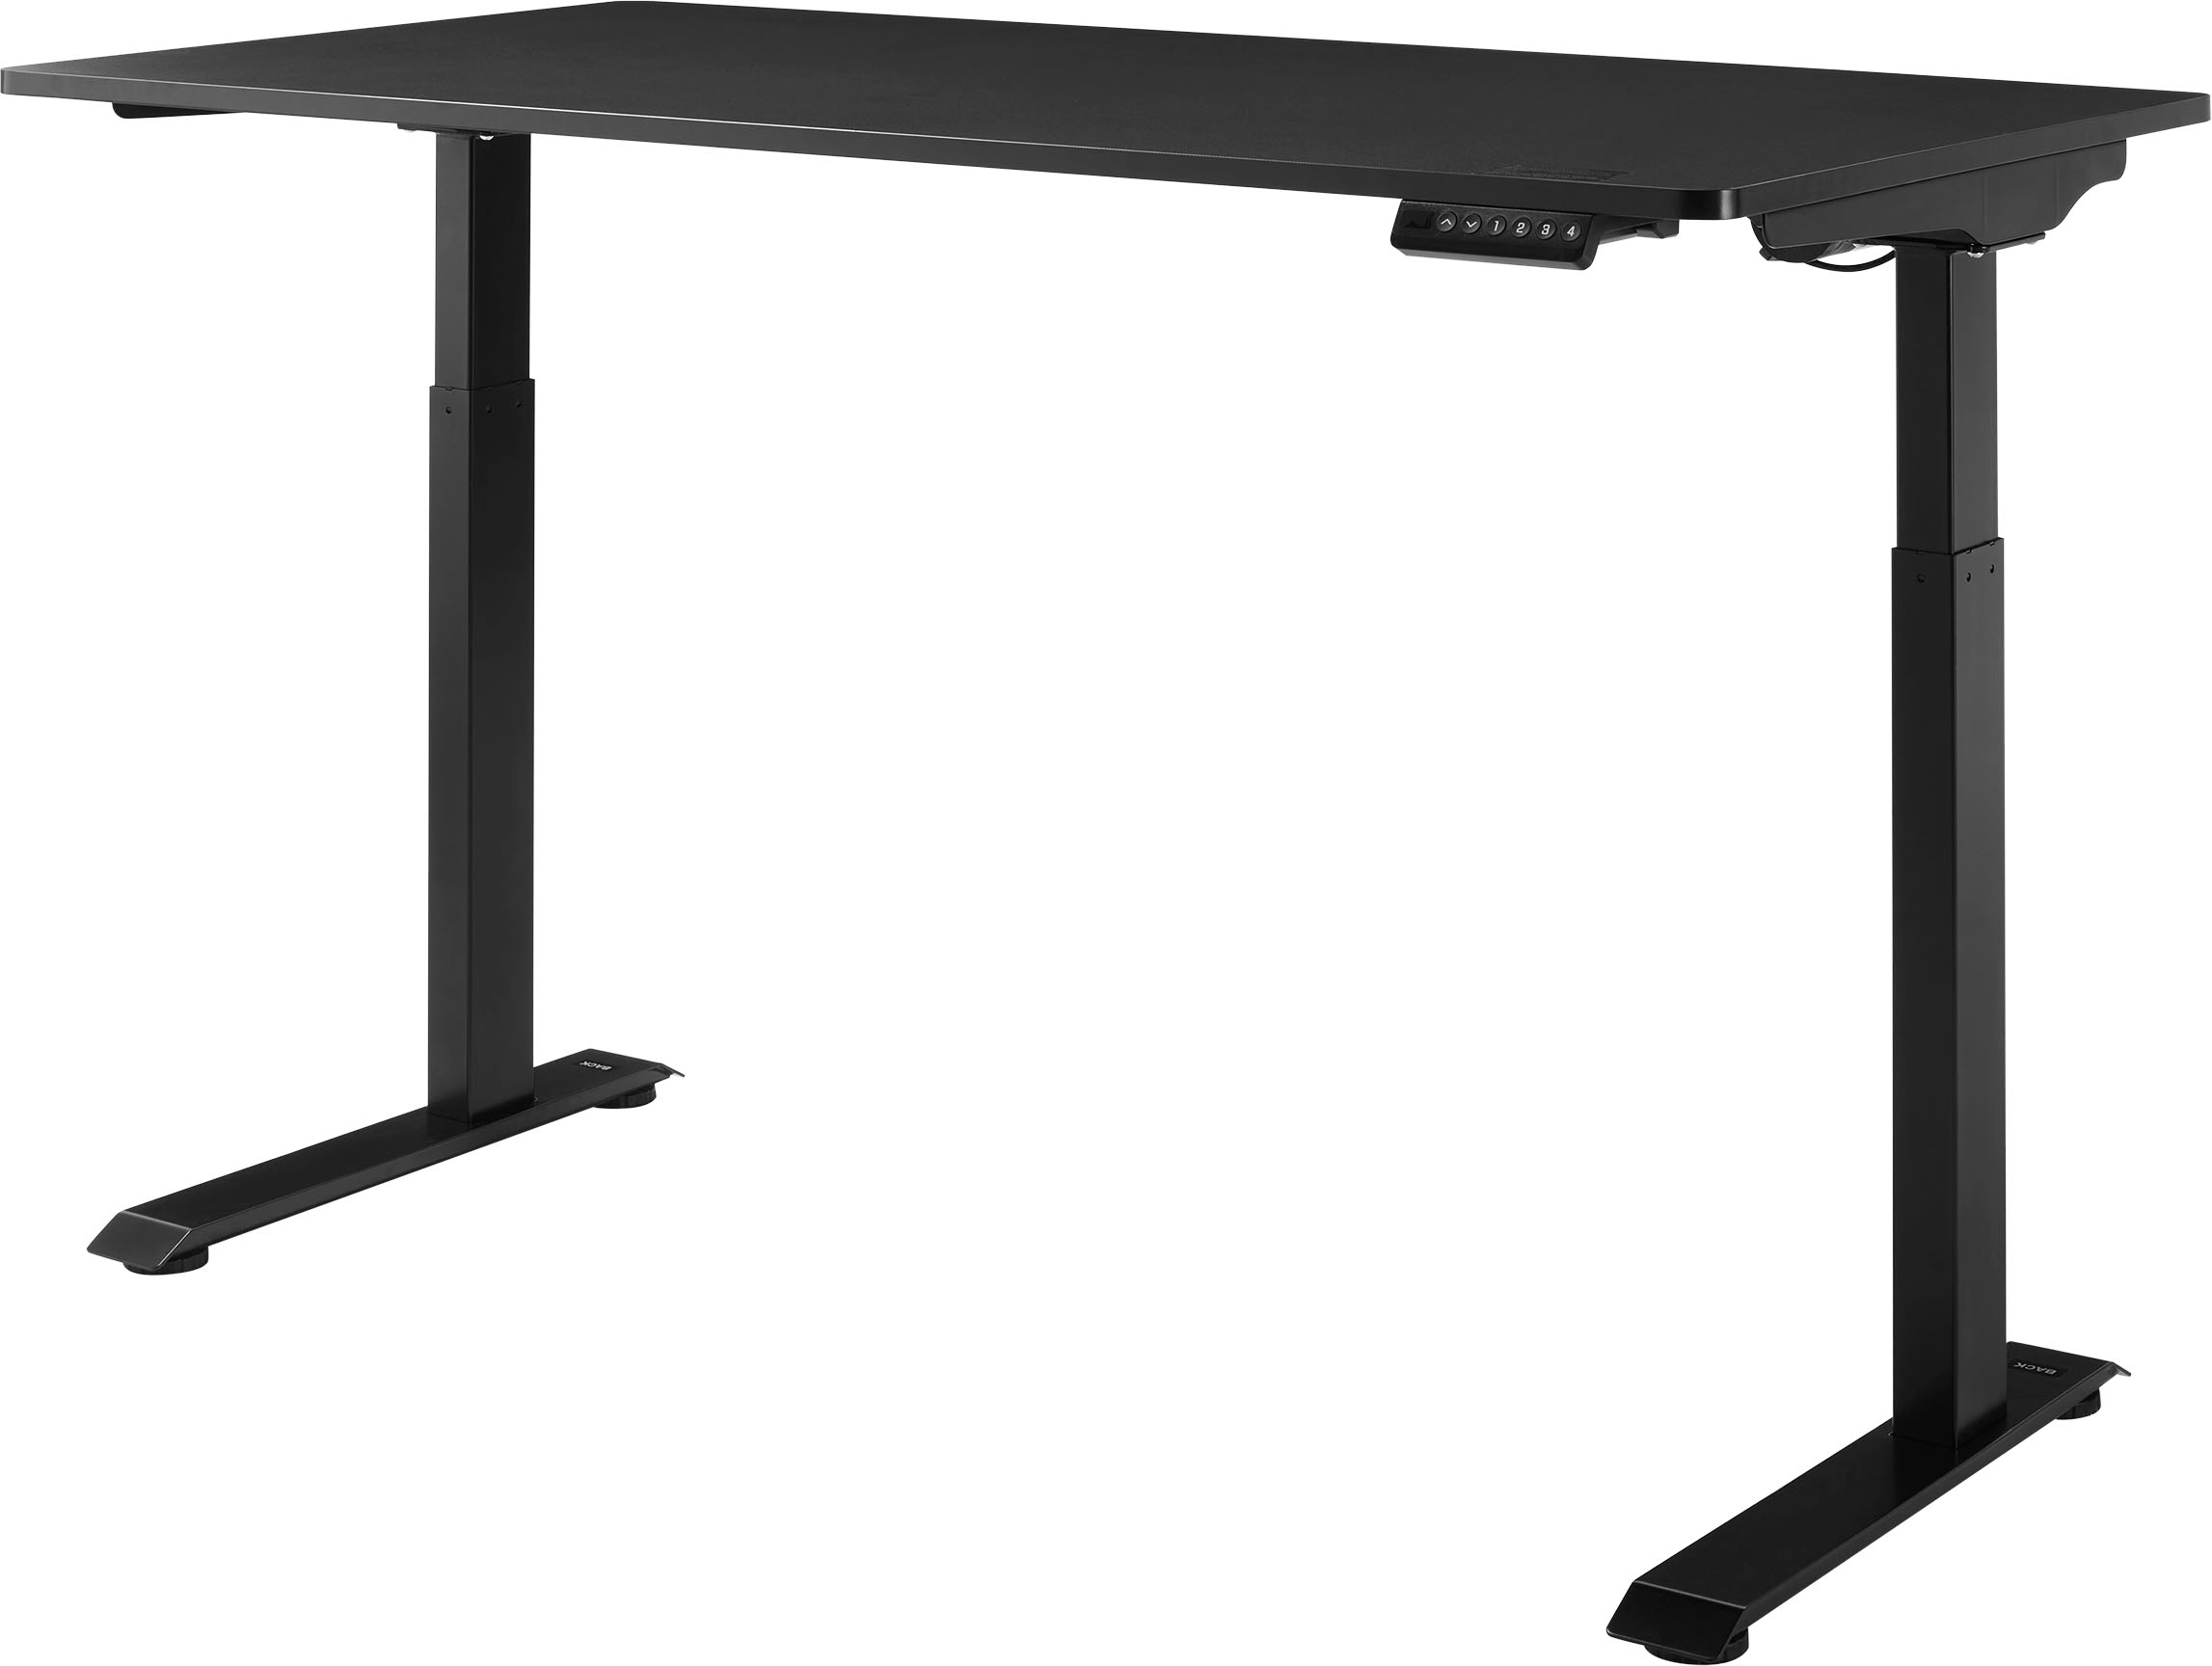 Questions and Answers: Insignia™ Adjustable Standing Desk with ...